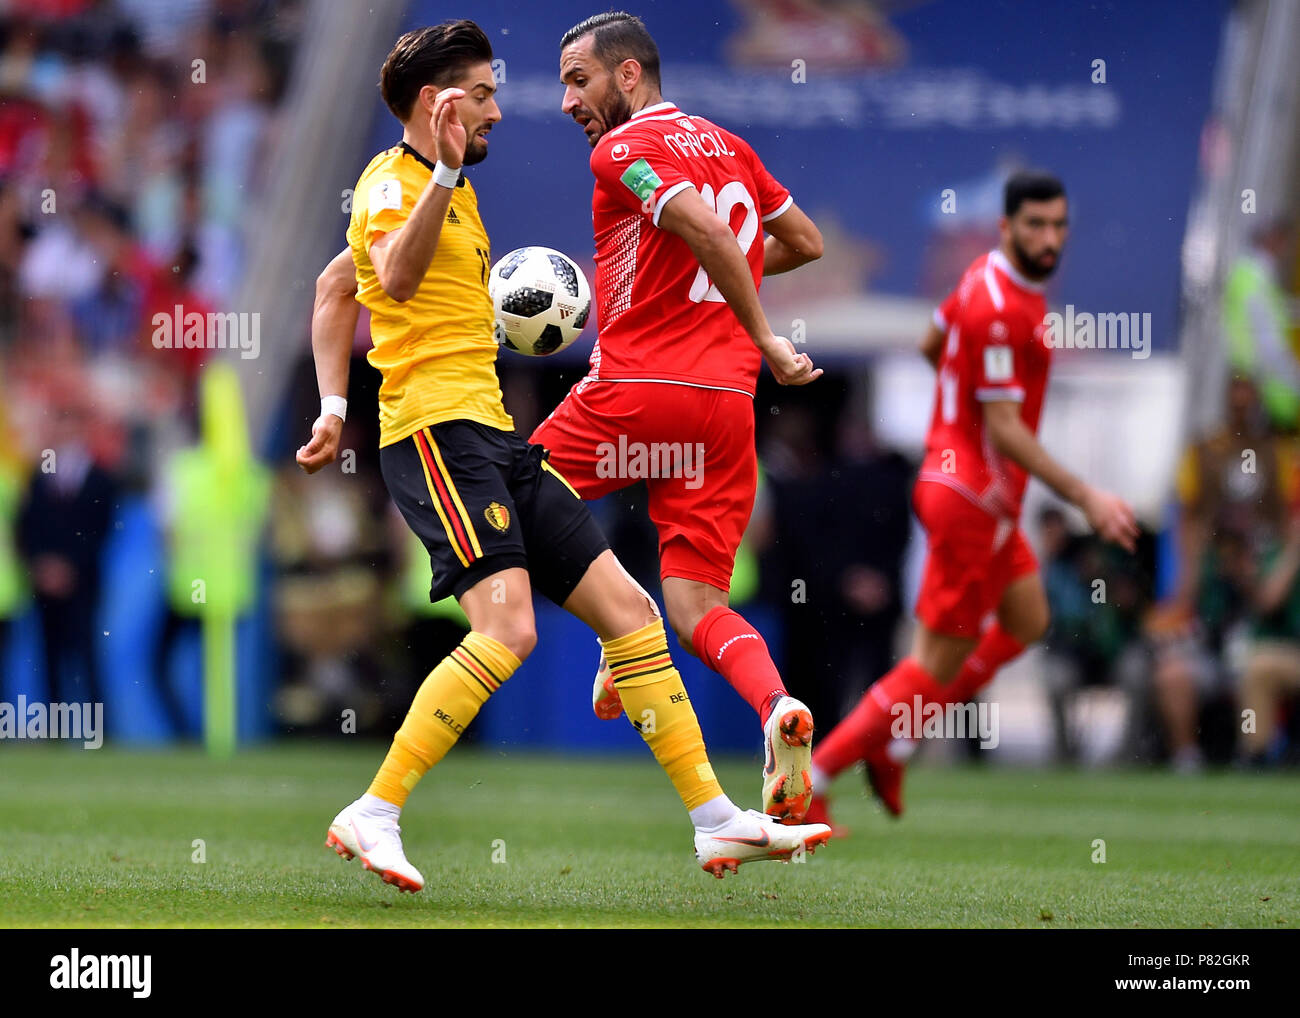 MOSCOW, RUSSIA - JUNE 23: Yannick Carrasco of Belgium competes with Ali Maaloul of Tunisia during the 2018 FIFA World Cup Russia group G match between Belgium and Tunisia at Spartak Stadium on June 23, 2018 in Moscow, Russia. (Photo by Lukasz Laskowski/PressFocus/MB Media) Stock Photo